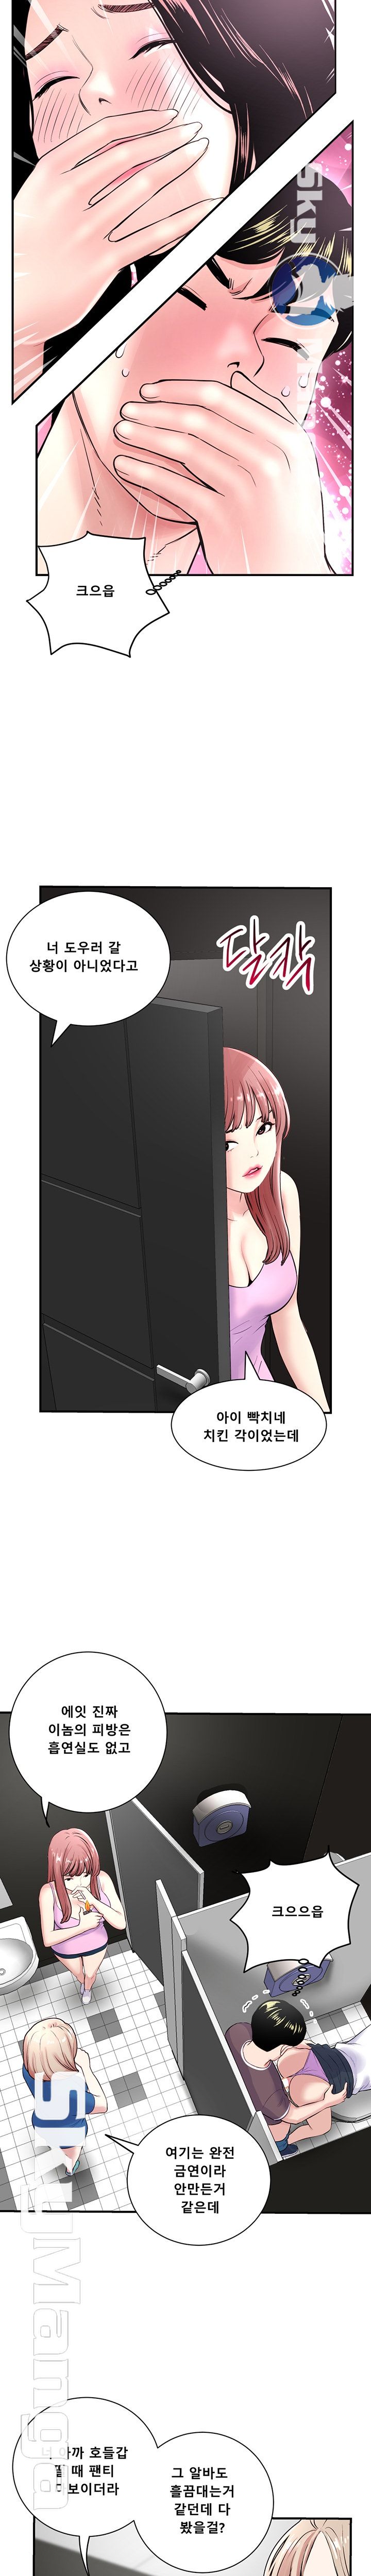 Late night PC Room Raw - Chapter 1 Page 38